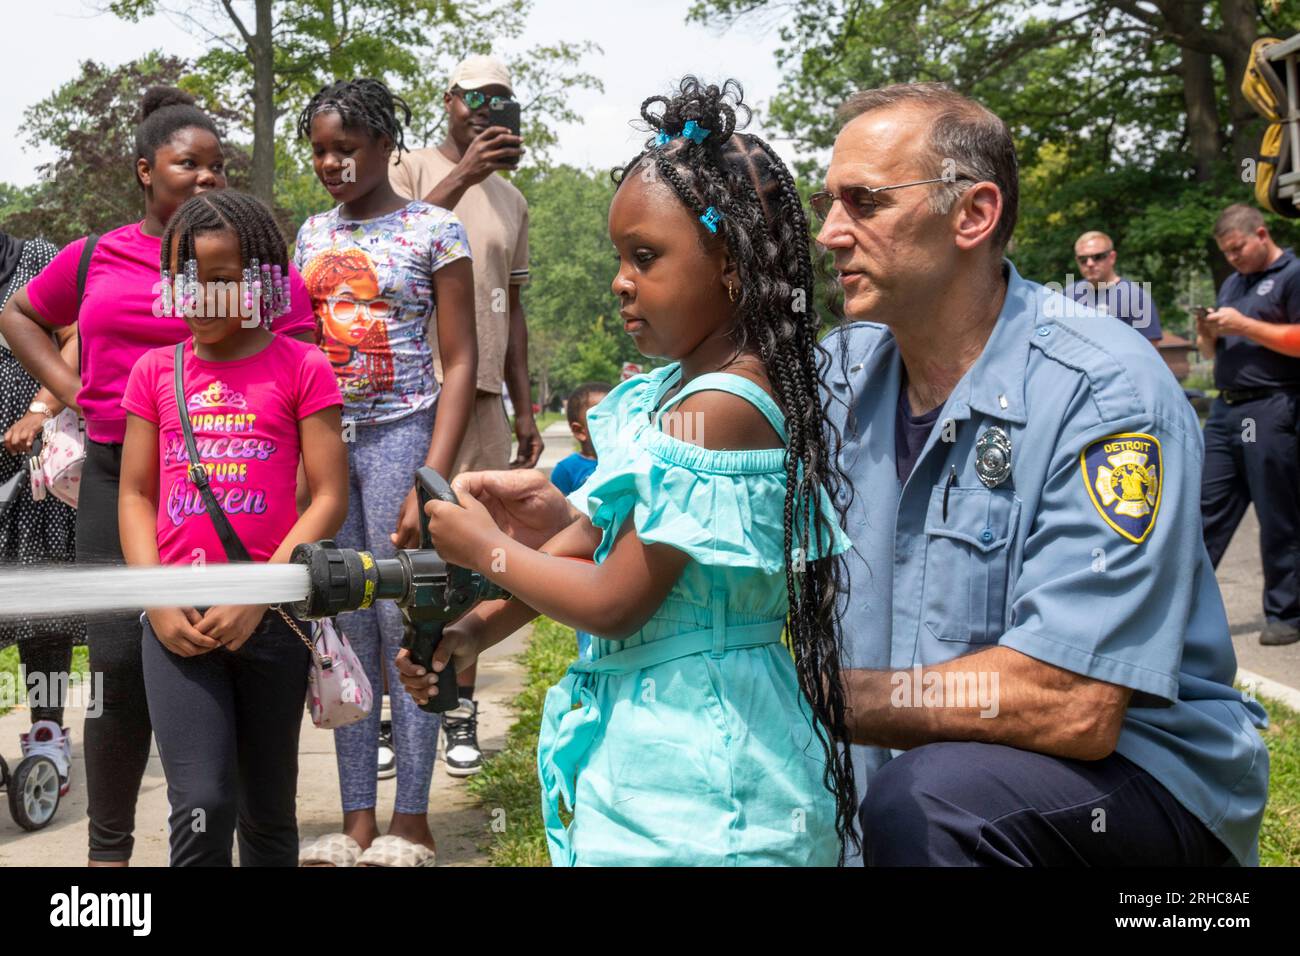 Detroit, Michigan - The Detroit Fire Department allows children to handle a fire hose as residents of the Morningside neighborhood hold a picnic/party Stock Photo